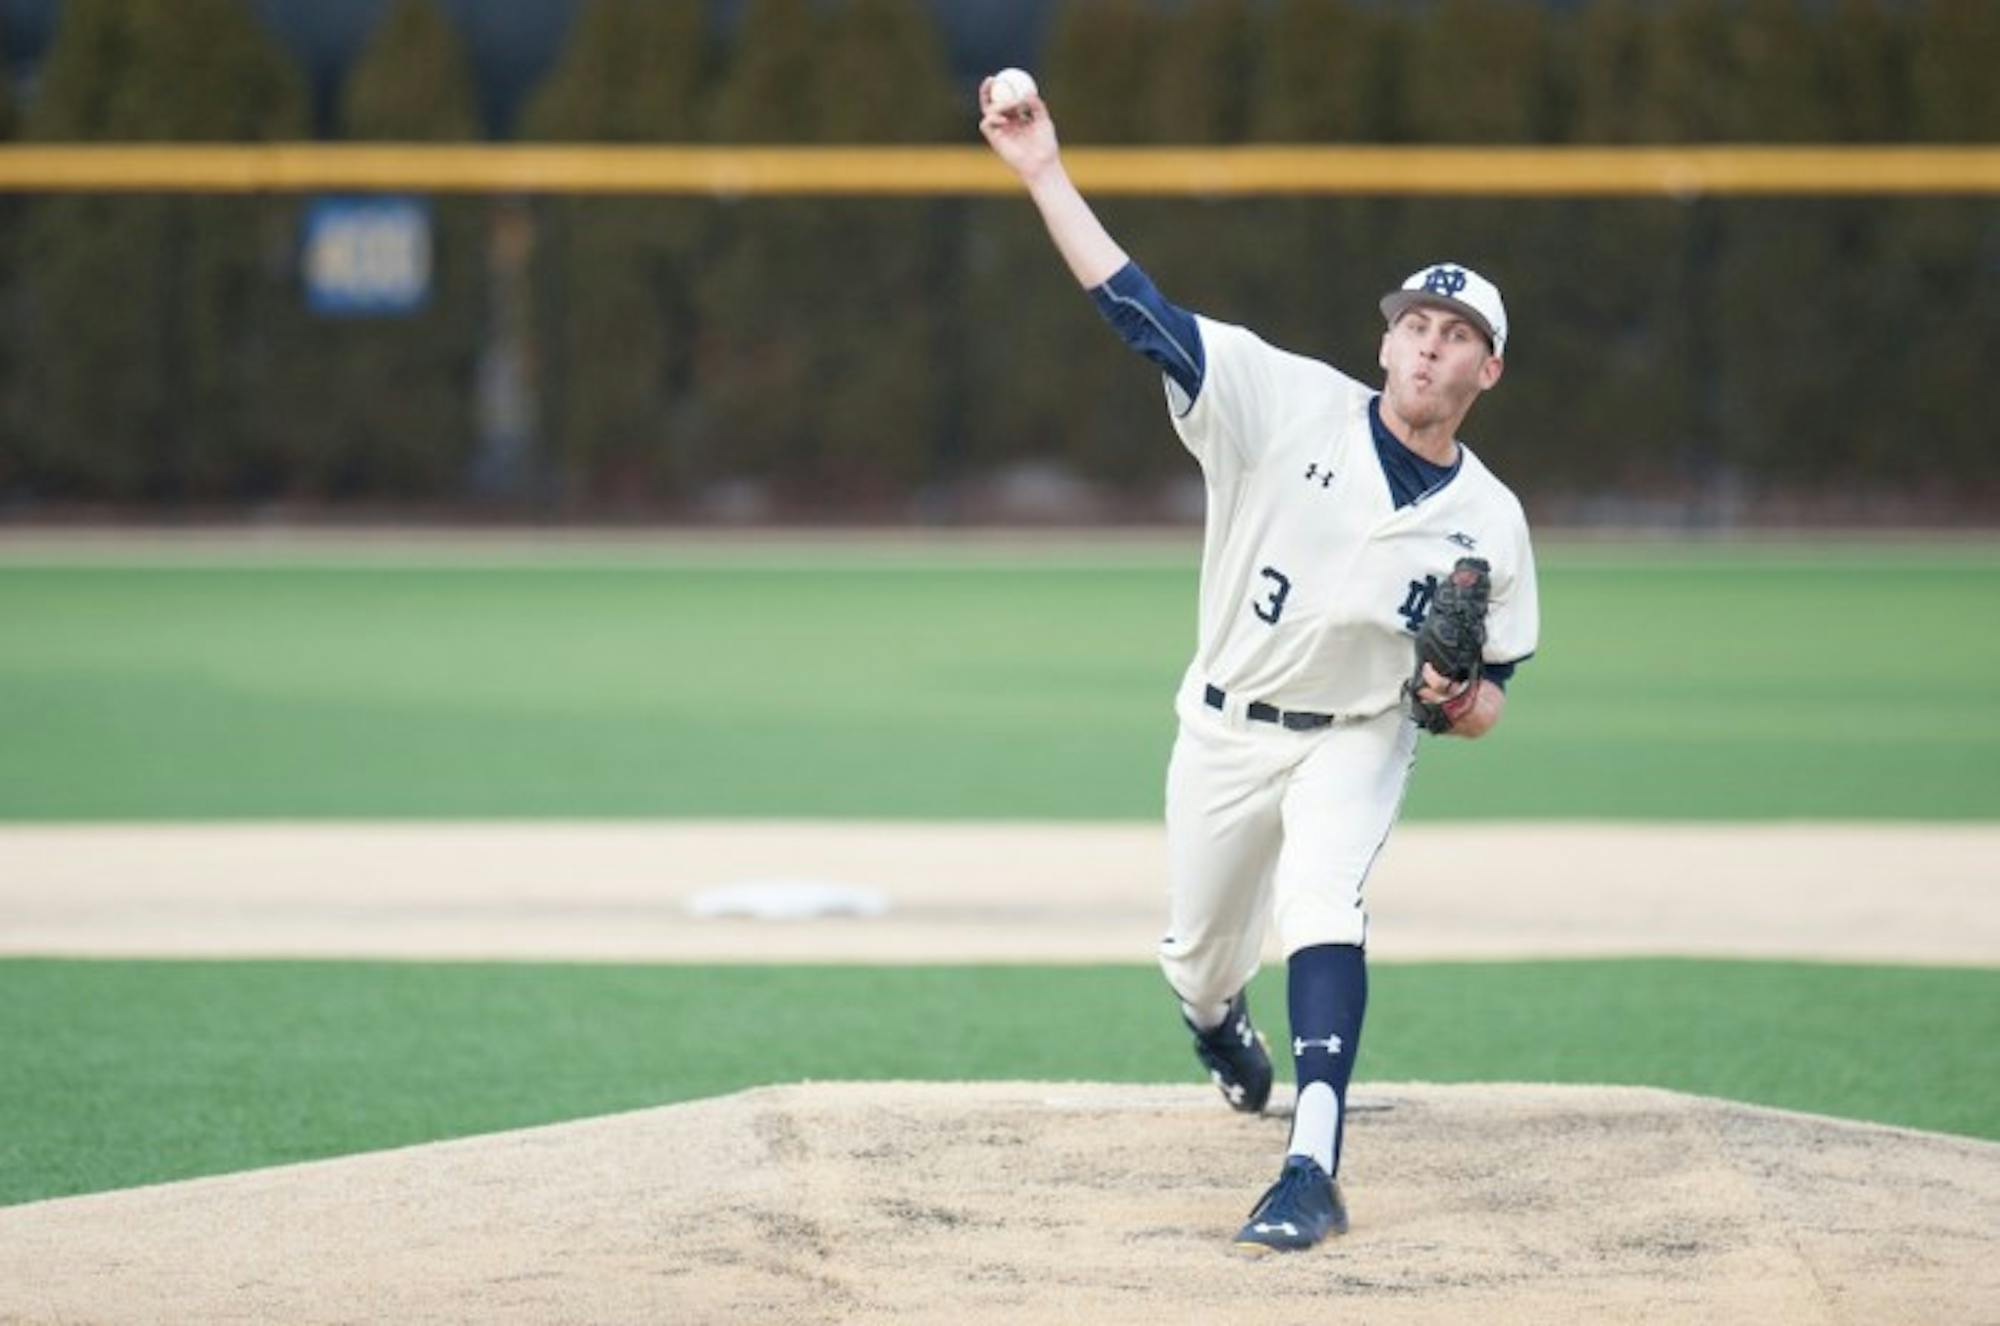 Irish junior Ryan Smoyer pitches during Notre Dame’s 8-3 win over Central Michigan on March 18 at Frank Eck Stadium. Smoyer is currently leading Notre Dame with a 1.35 ERA through seven games.